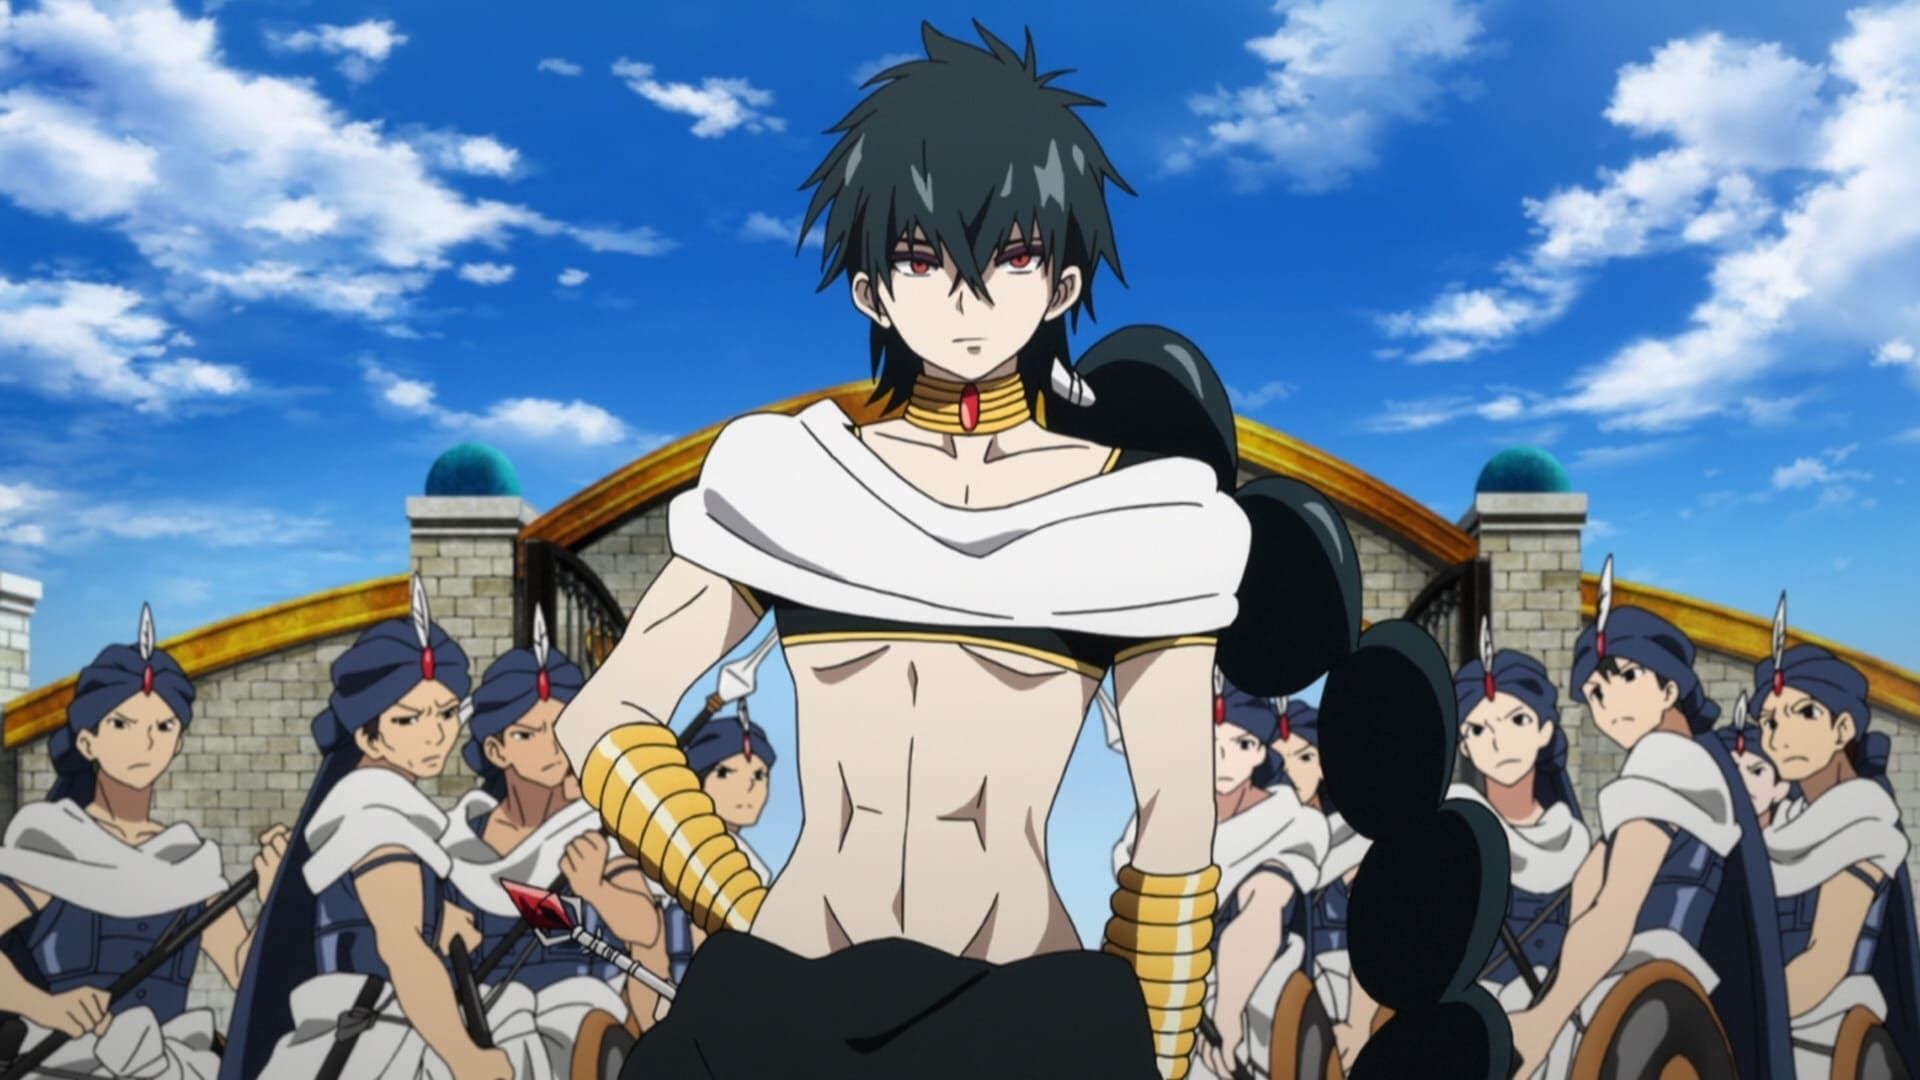 Magi - watch tv show streaming online